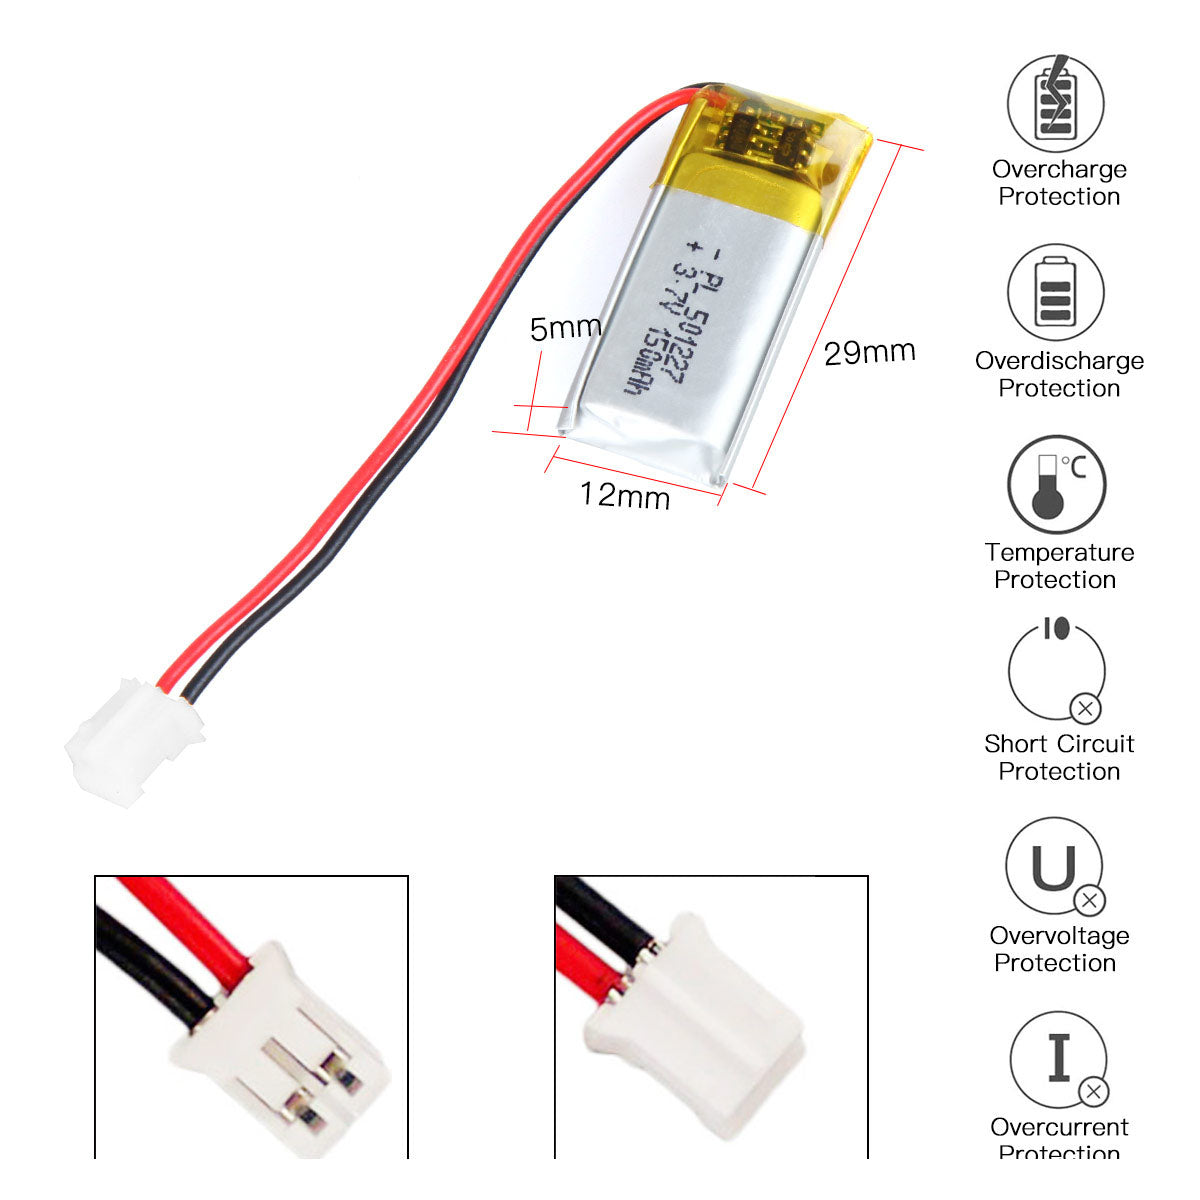 YDL 3.7V 150mAh 501227 Rechargeable Lipo Battery with JST Connector - YDL Battery